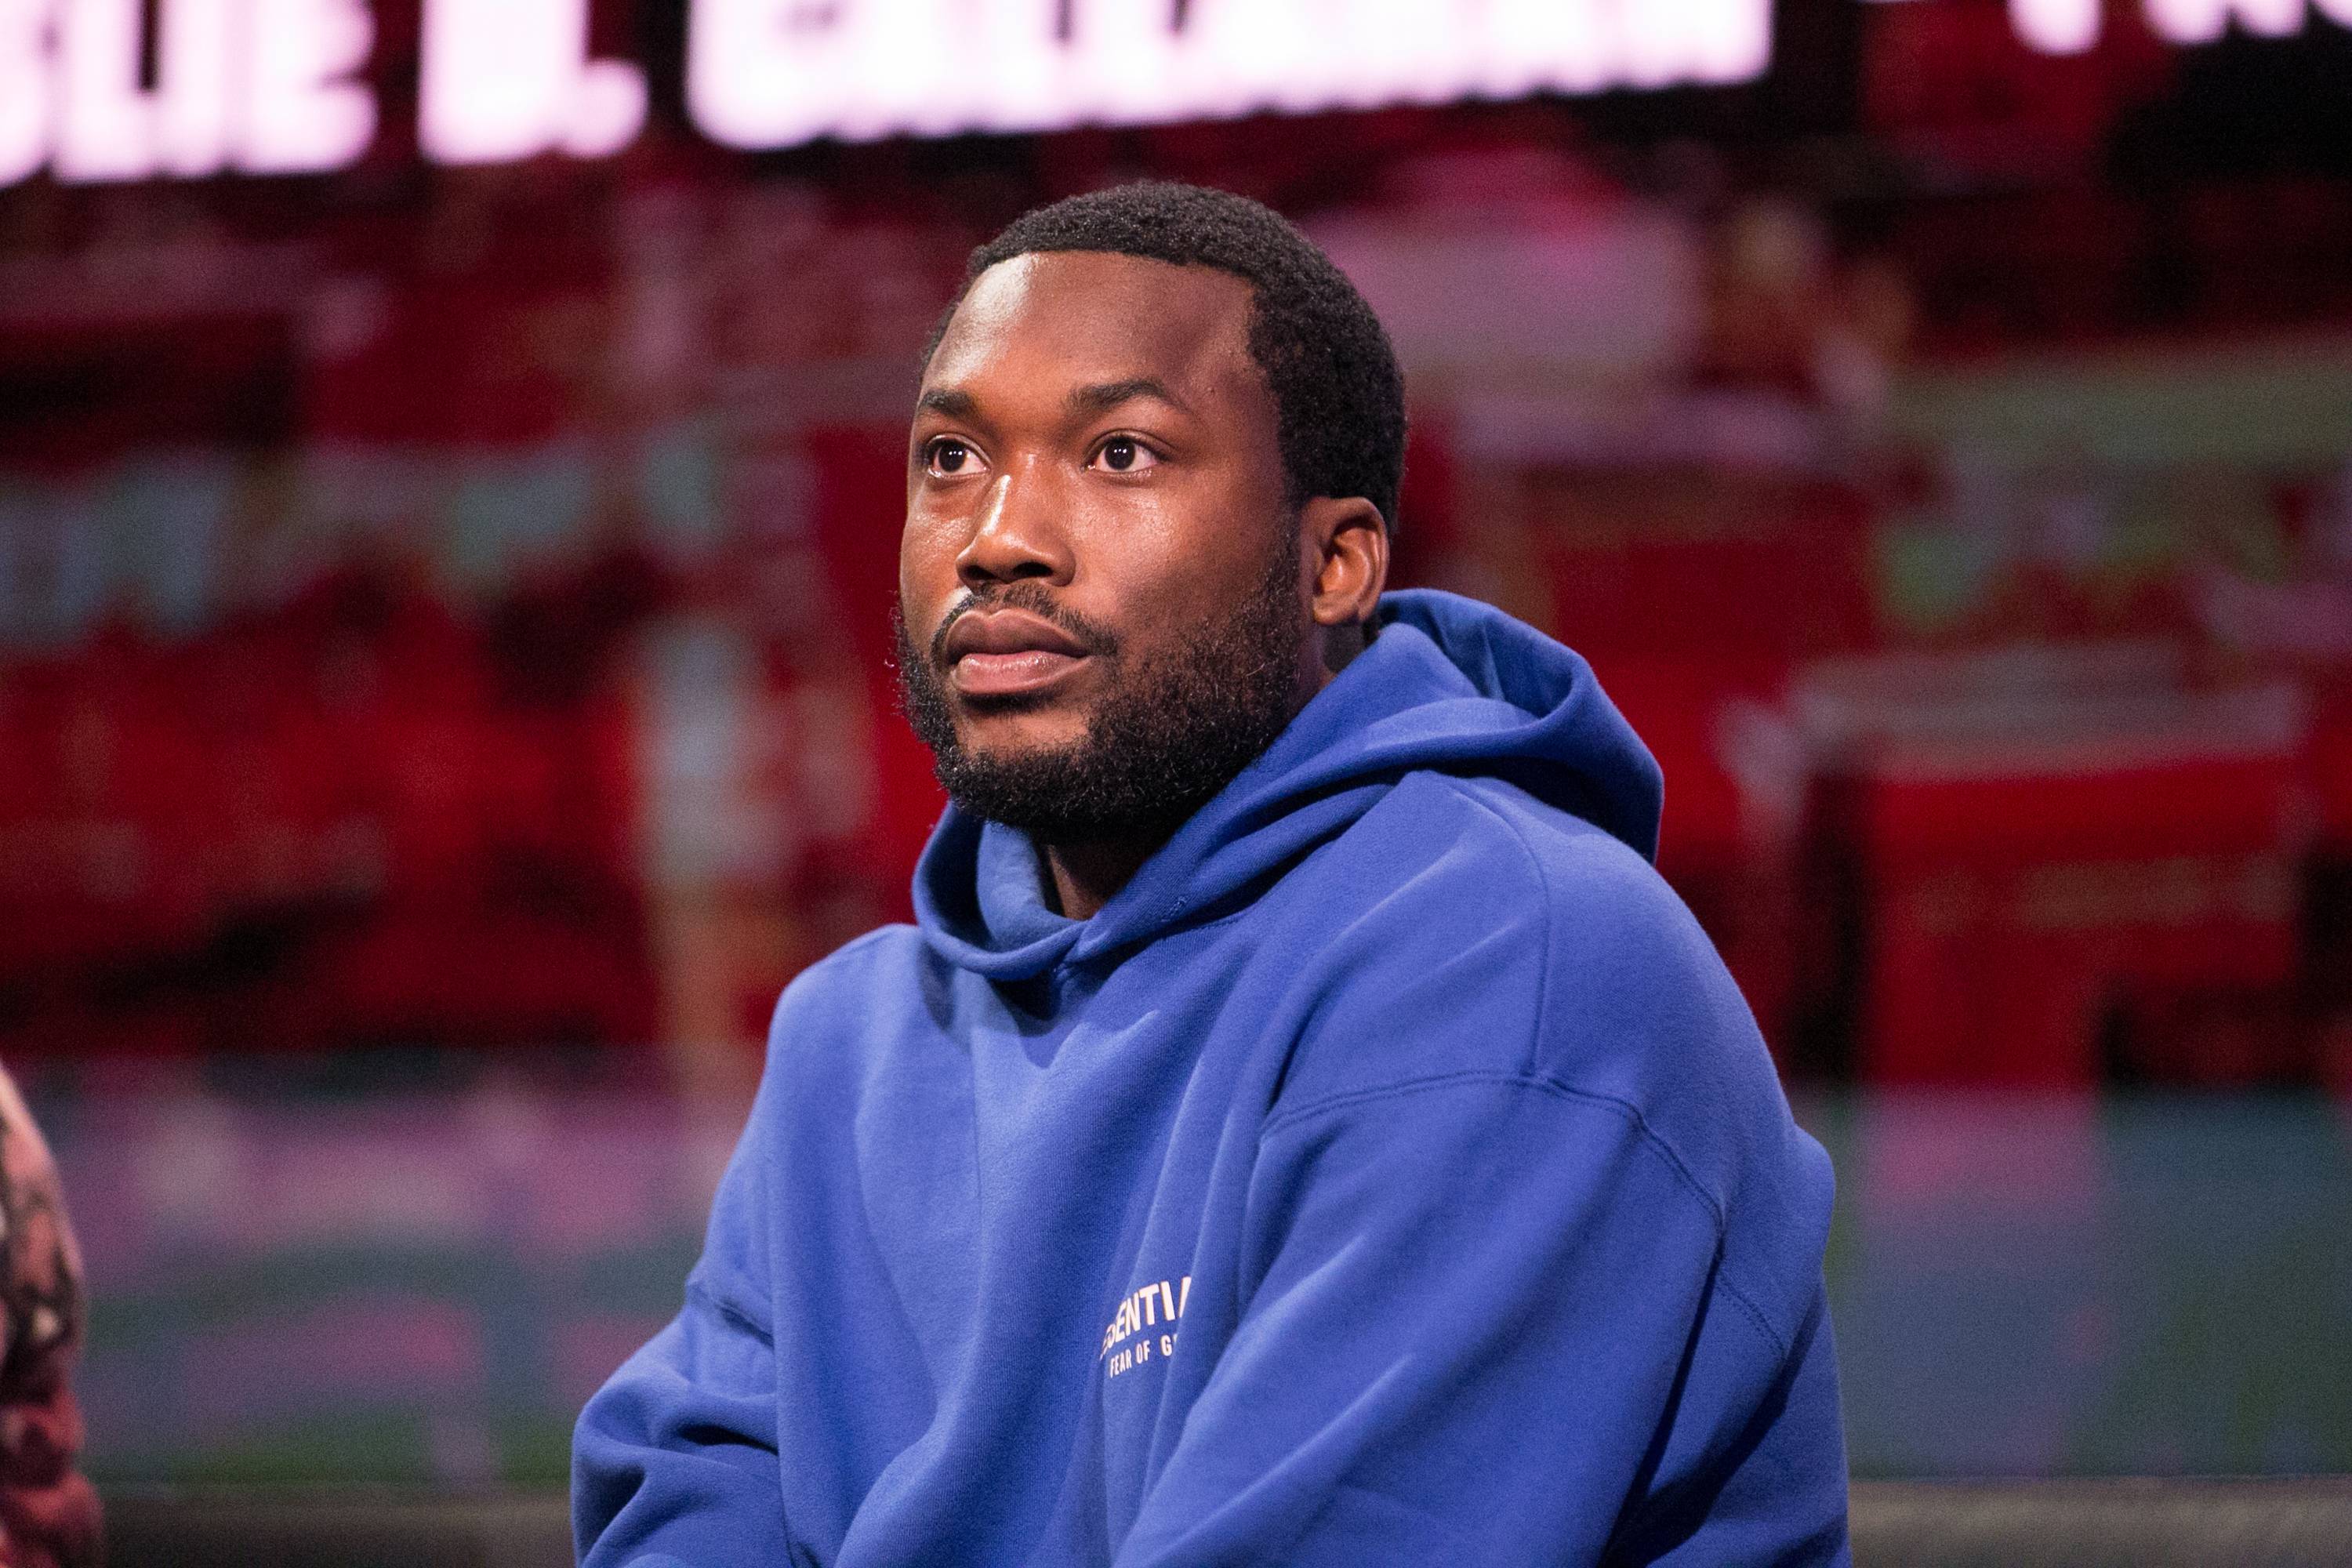 Meek Mill Made A Harrowing Confession About Hollywood, And Fans